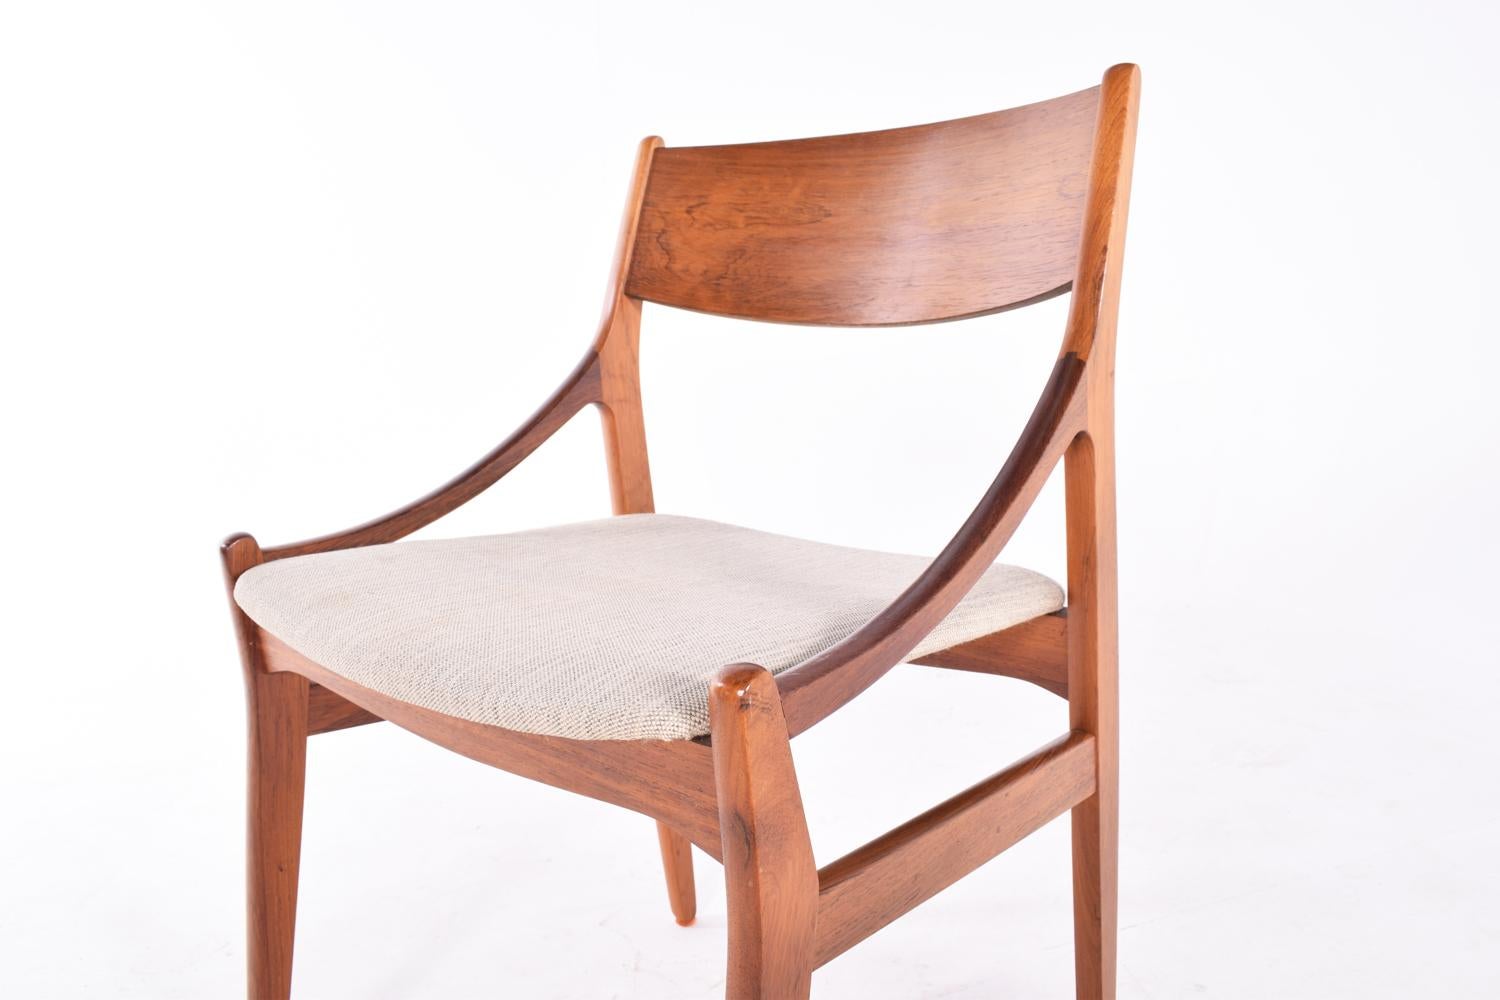 Mid-20th Century Midcentury Rosewood Dinning Chairs by Vestervig Erikson for Brdr. Tromborg